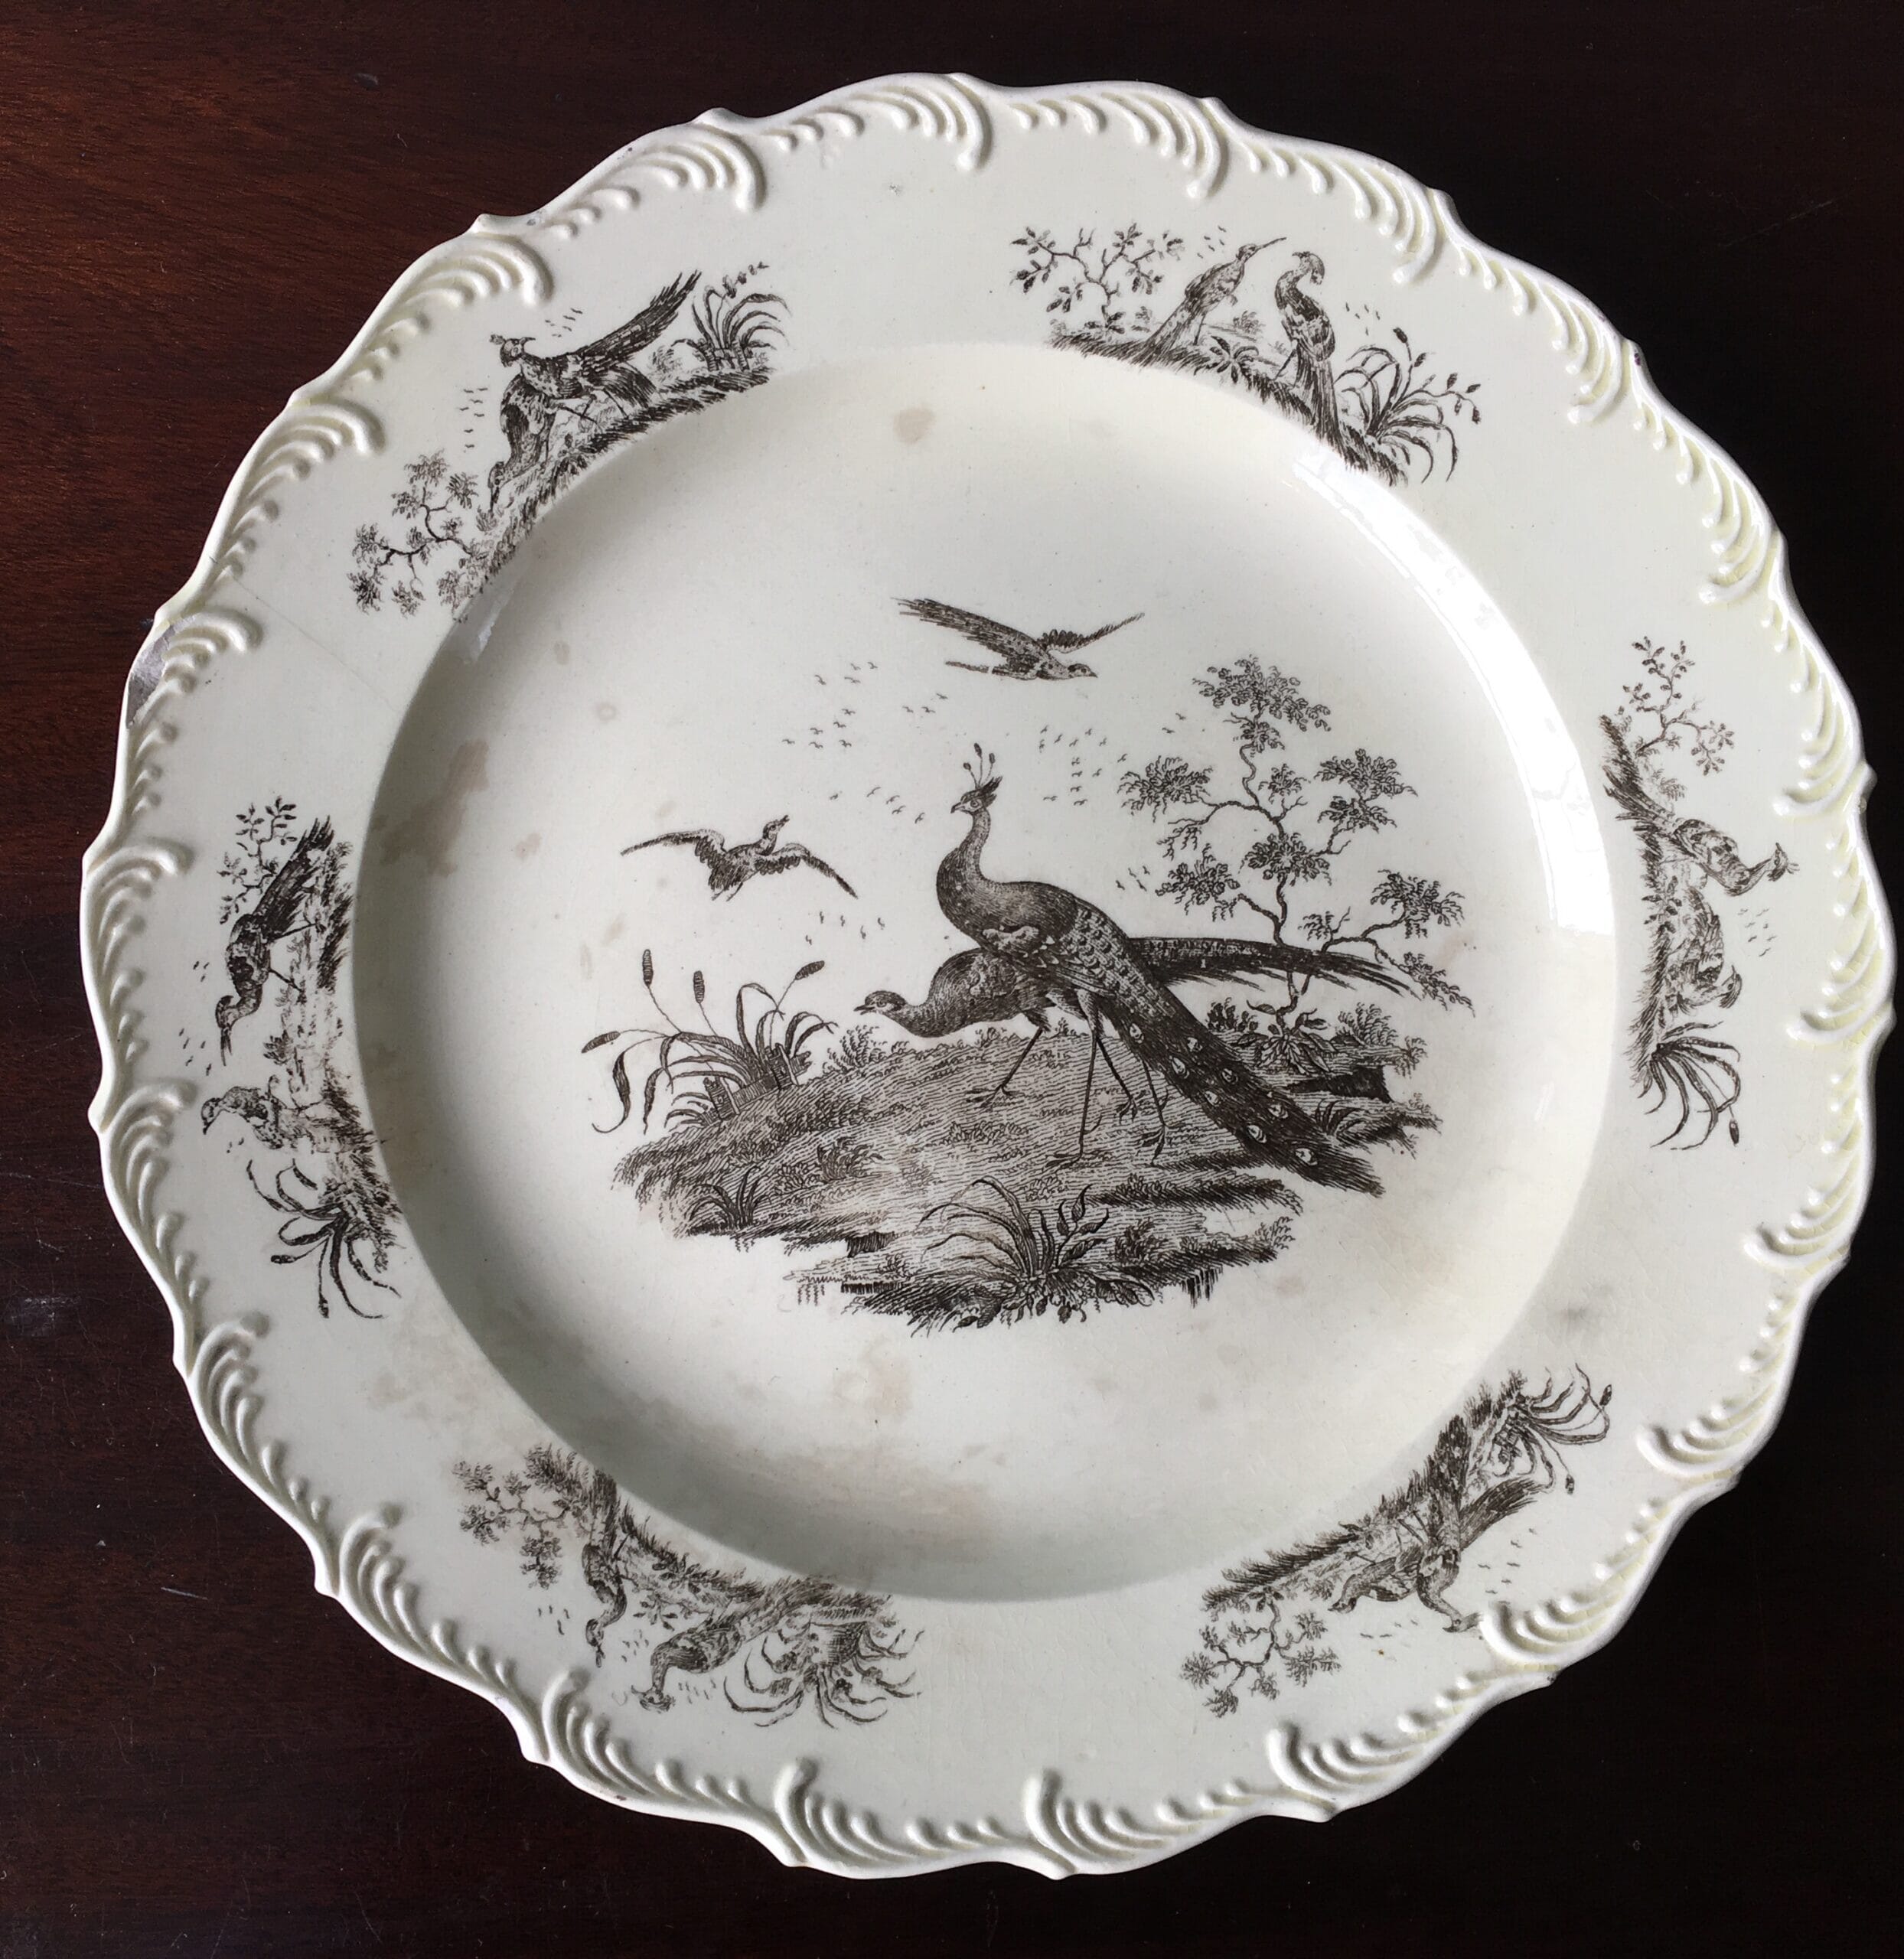 Leeds creamware plate, feather moulded rim, exotic birds print by Sadler & Green c.1770 -0